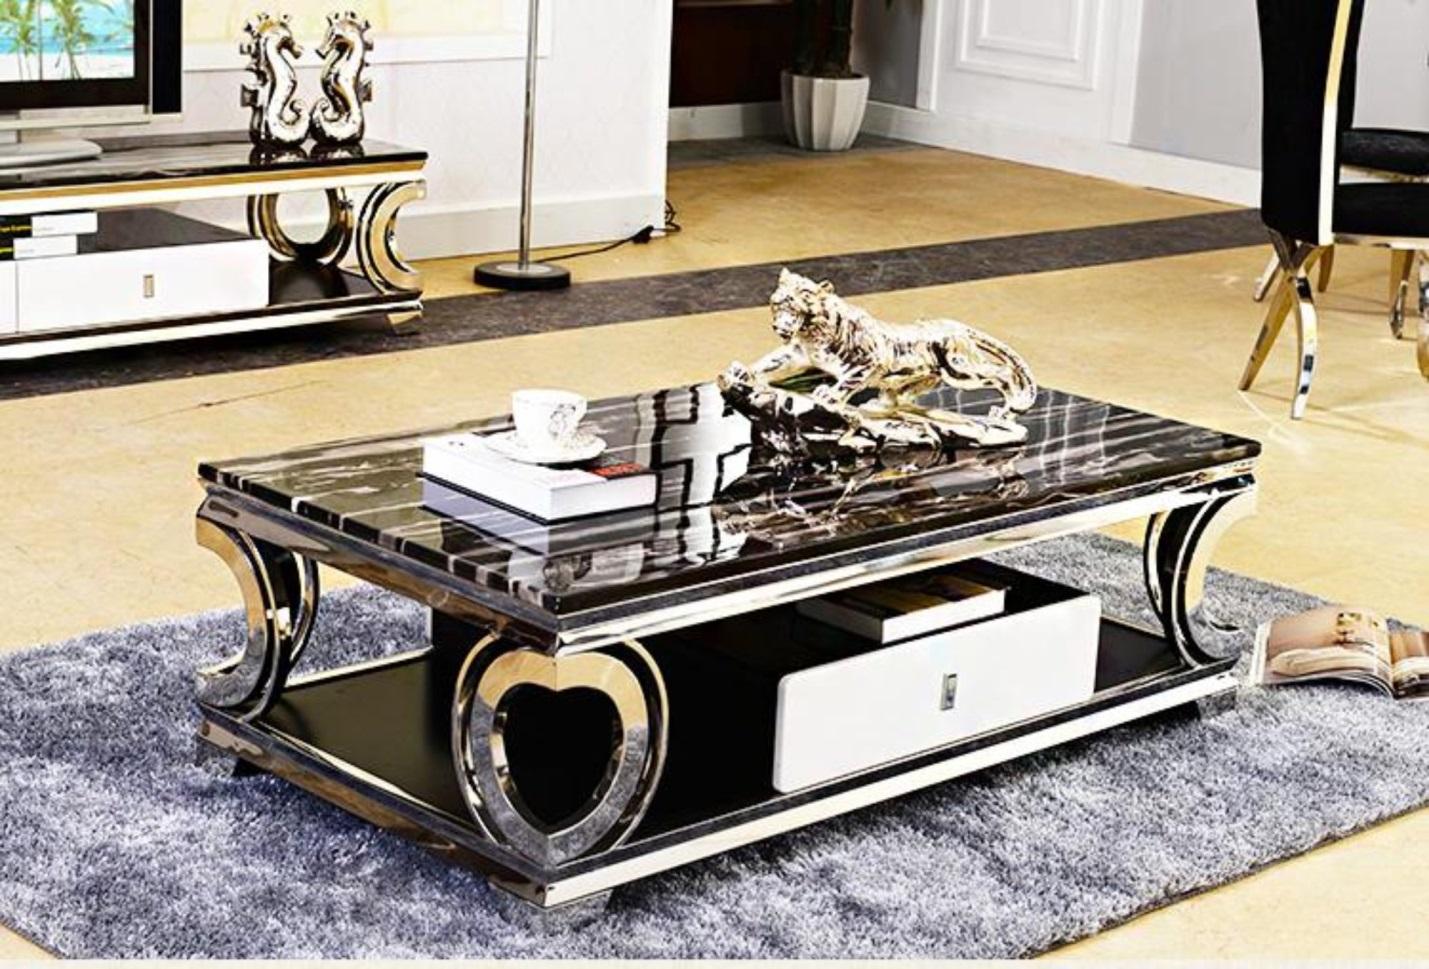 https://cdn.shopify.com/s/files/1/1425/0242/products/Natural-marble-Stainless-steel-Coffee-Table-Living-Room-Home-Furniture-minimalist-modern-rectangle-mesas-de-centro_2000x.jpg?v=1596842685